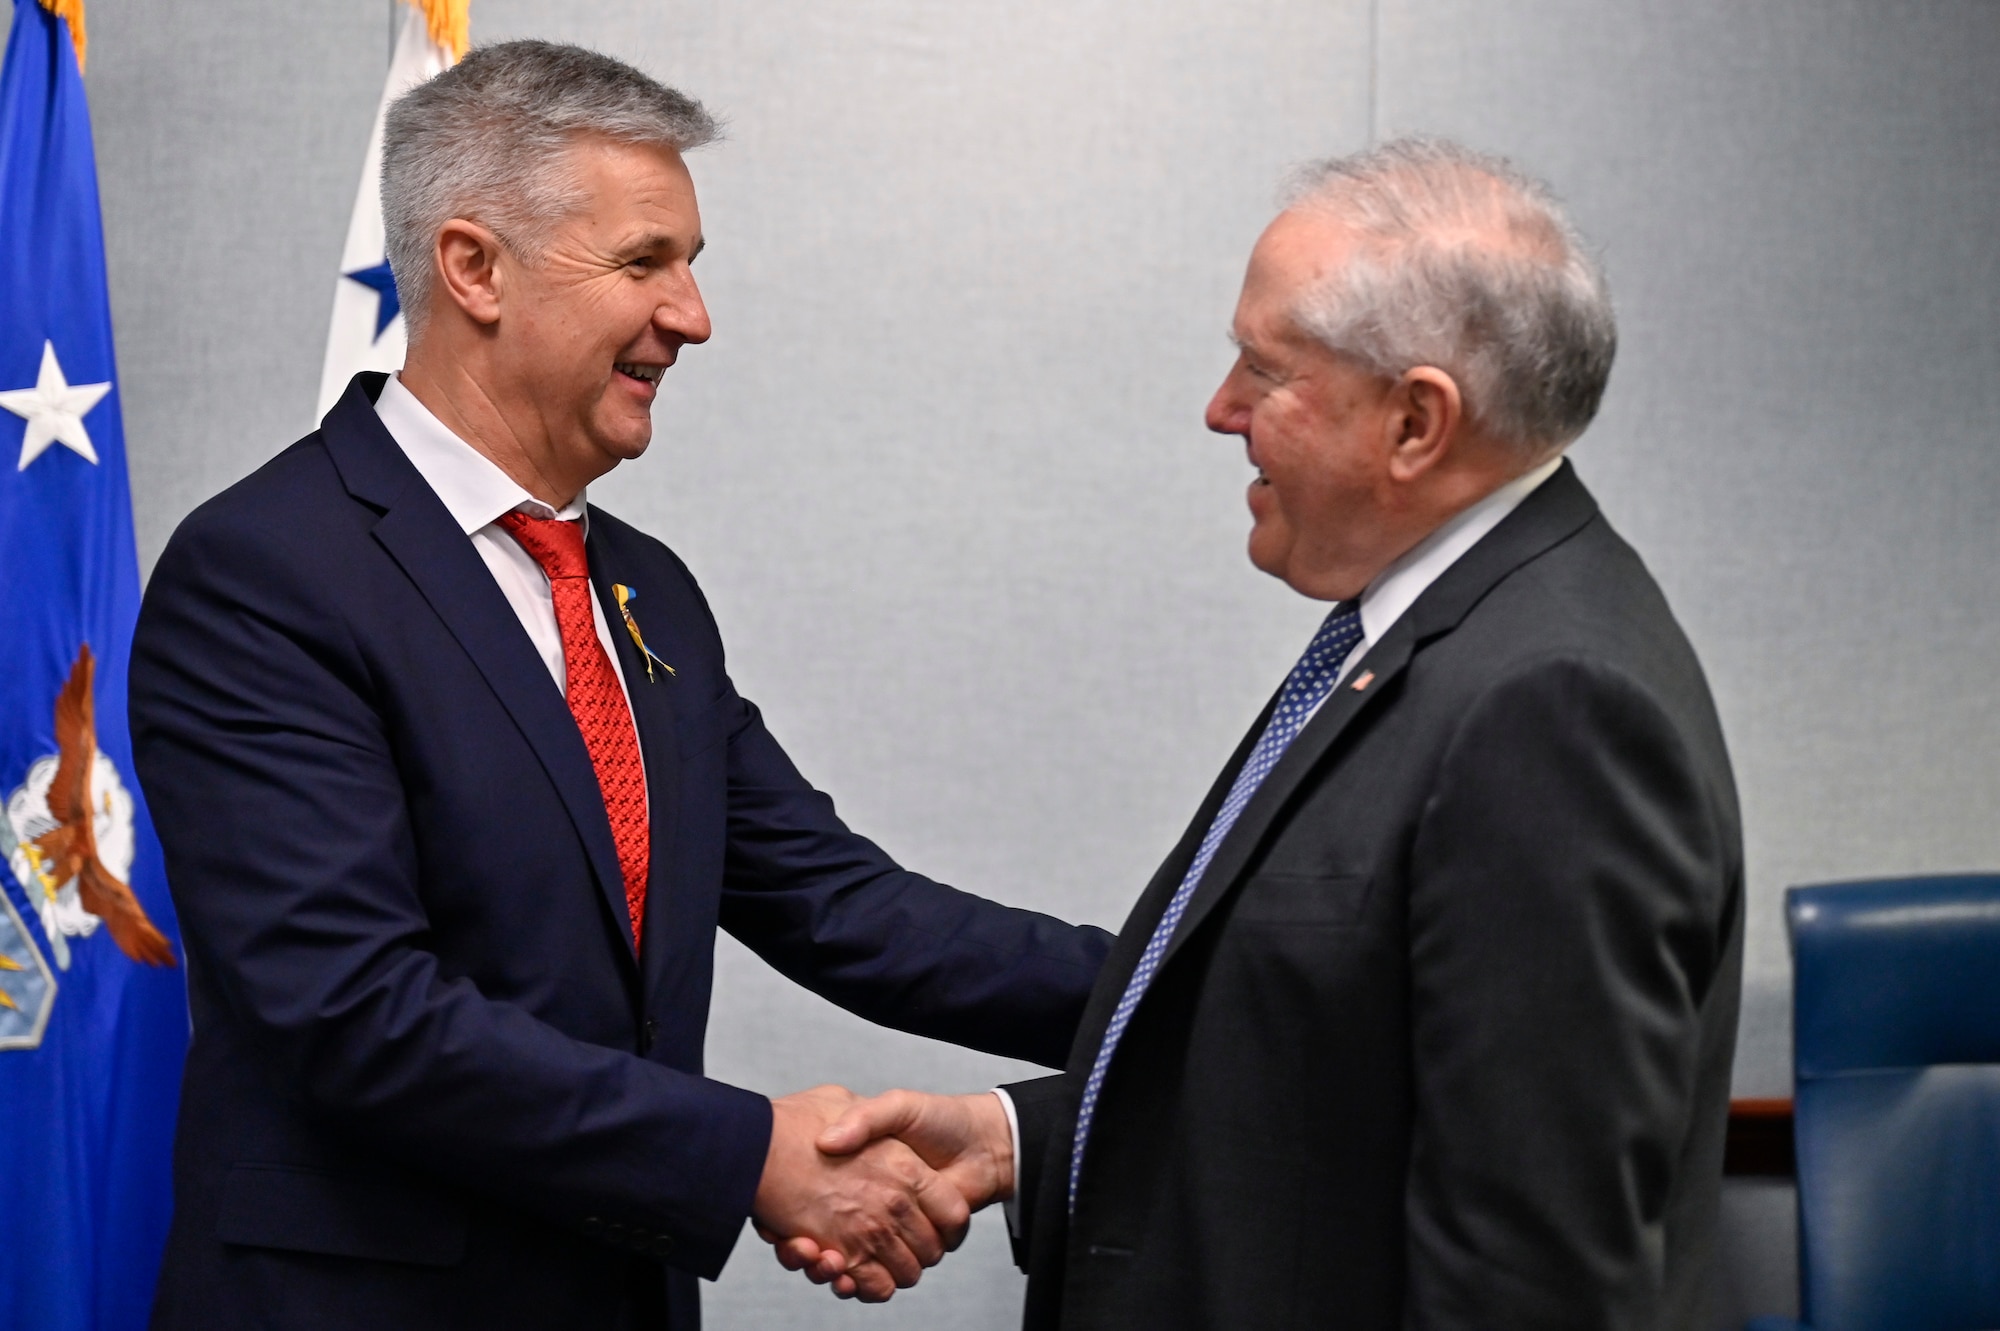 Dr. Artis Pabriks, left, minister of defense and deputy prime minister of Latvia, greets Secretary of the Air Force Frank Kendall.